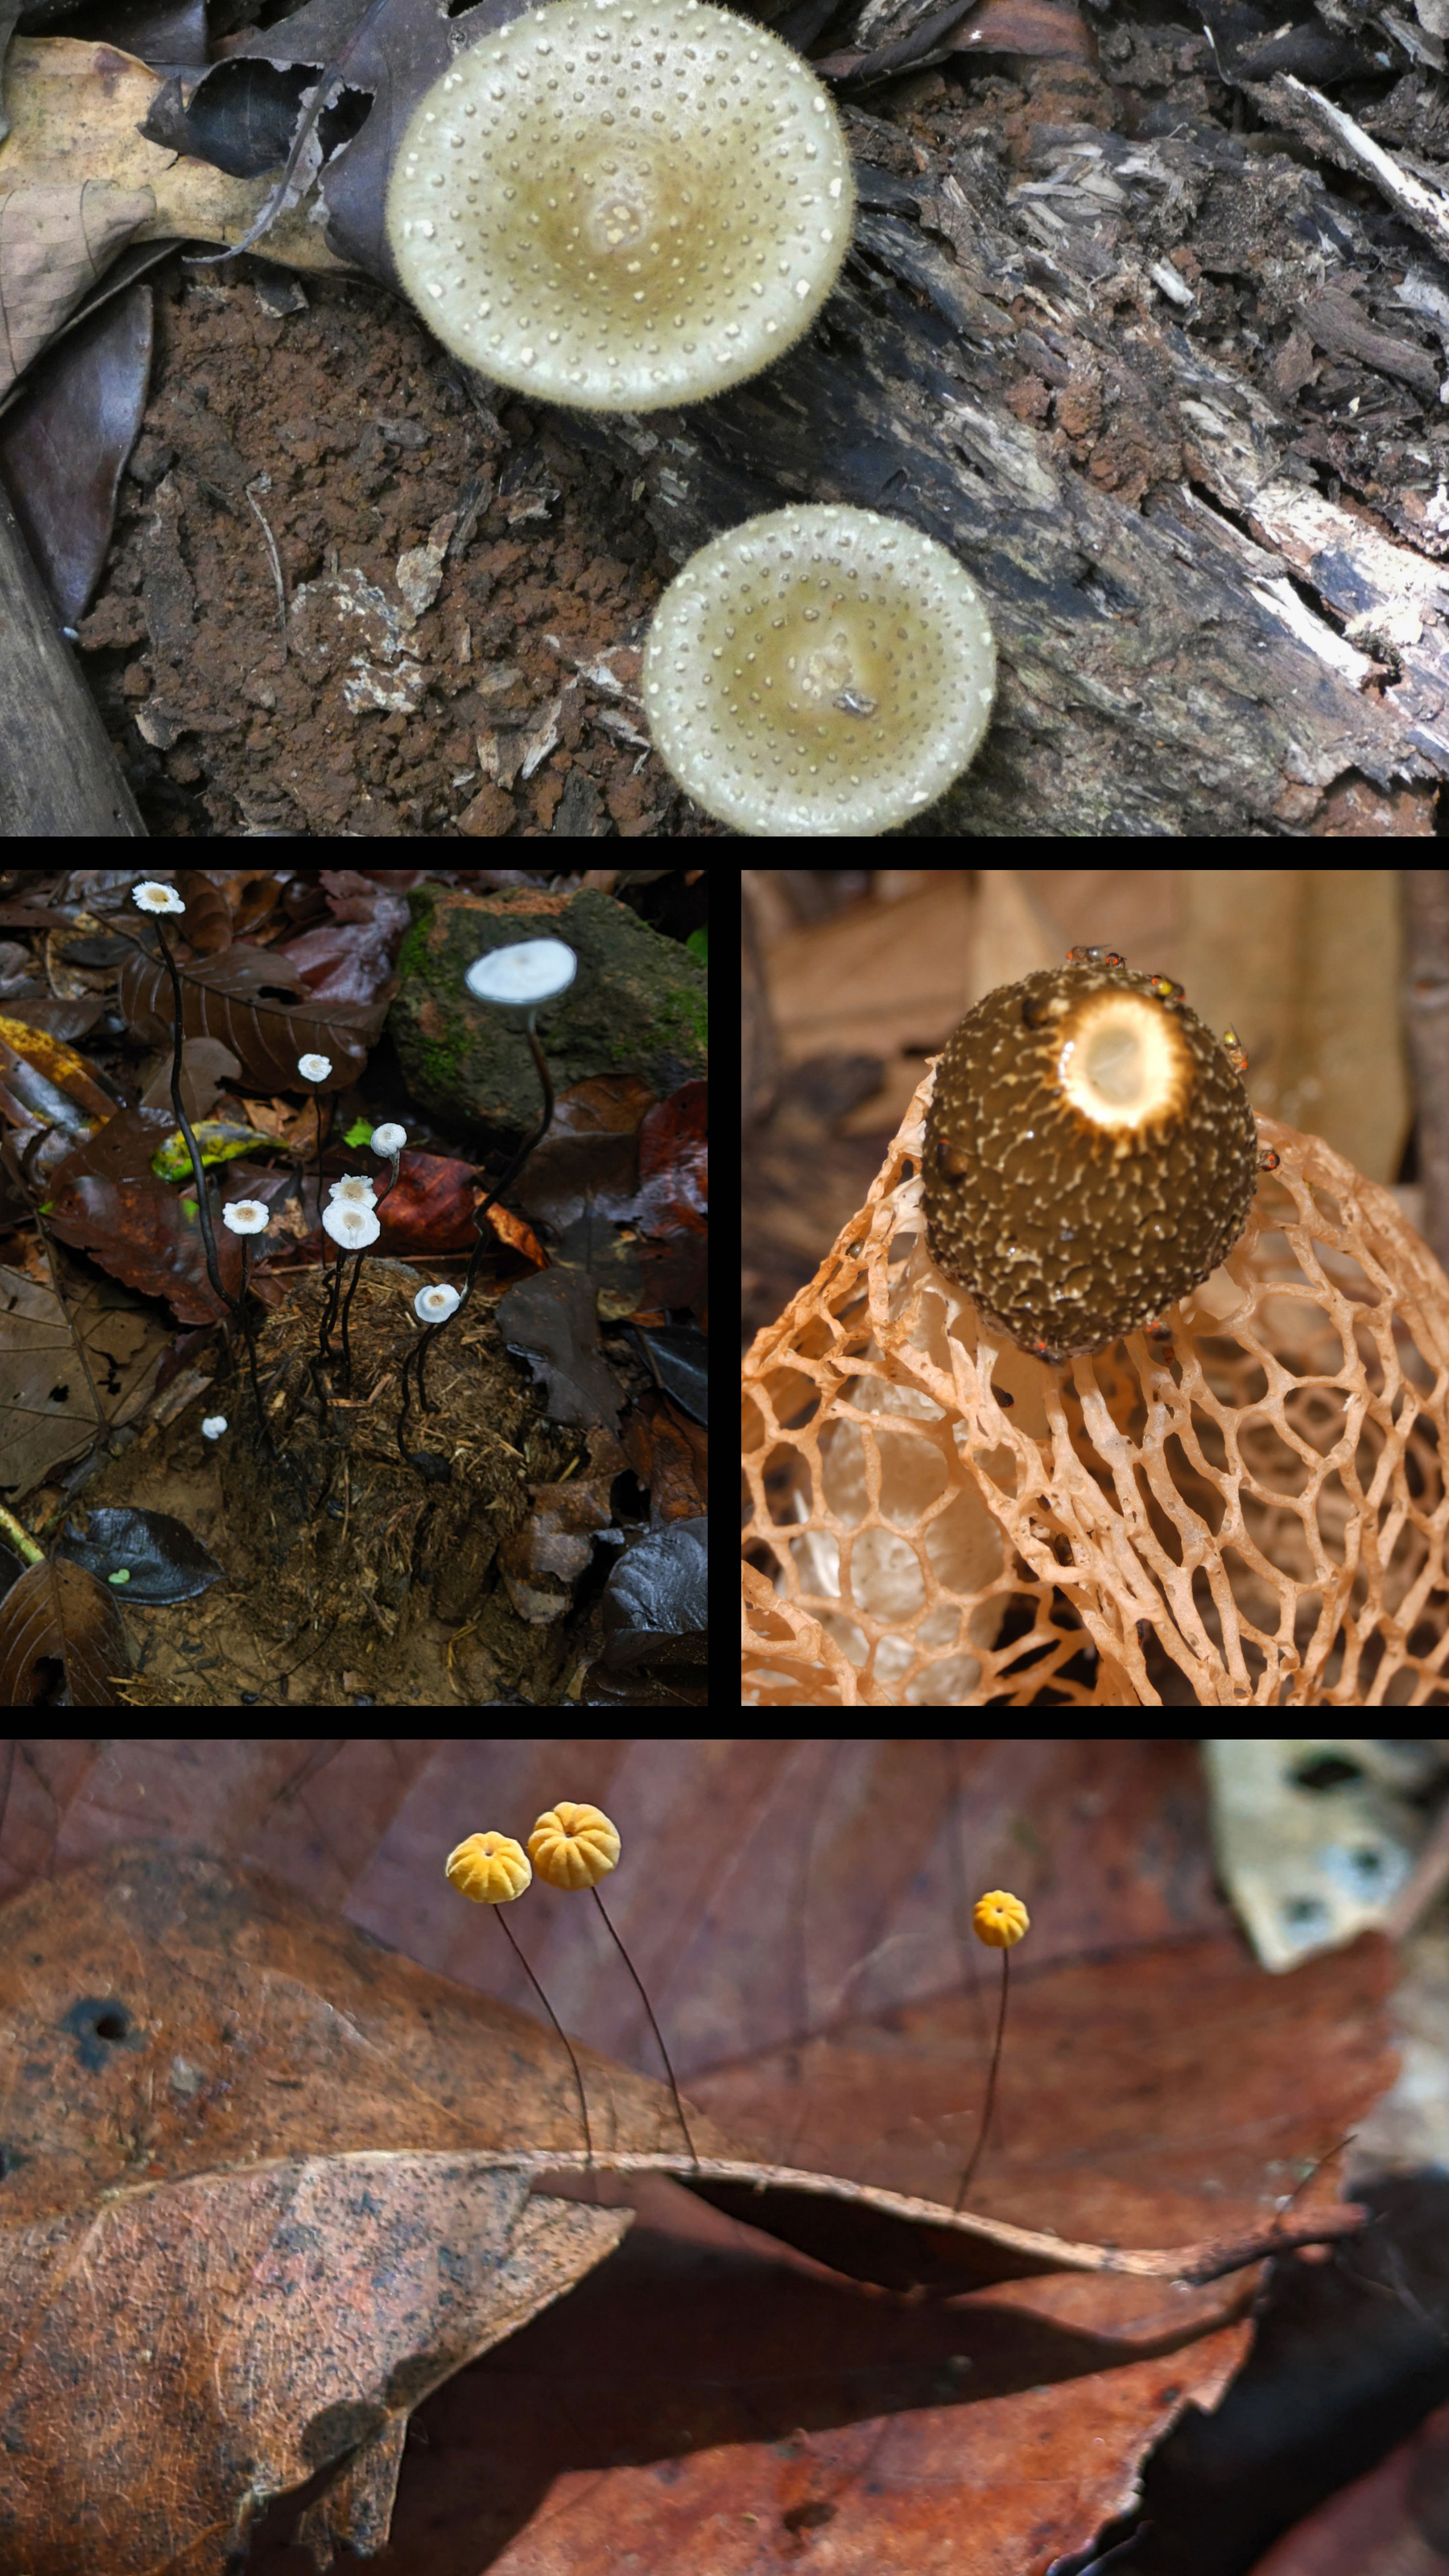 Several photos of fungi in tropical forest ecosystems.